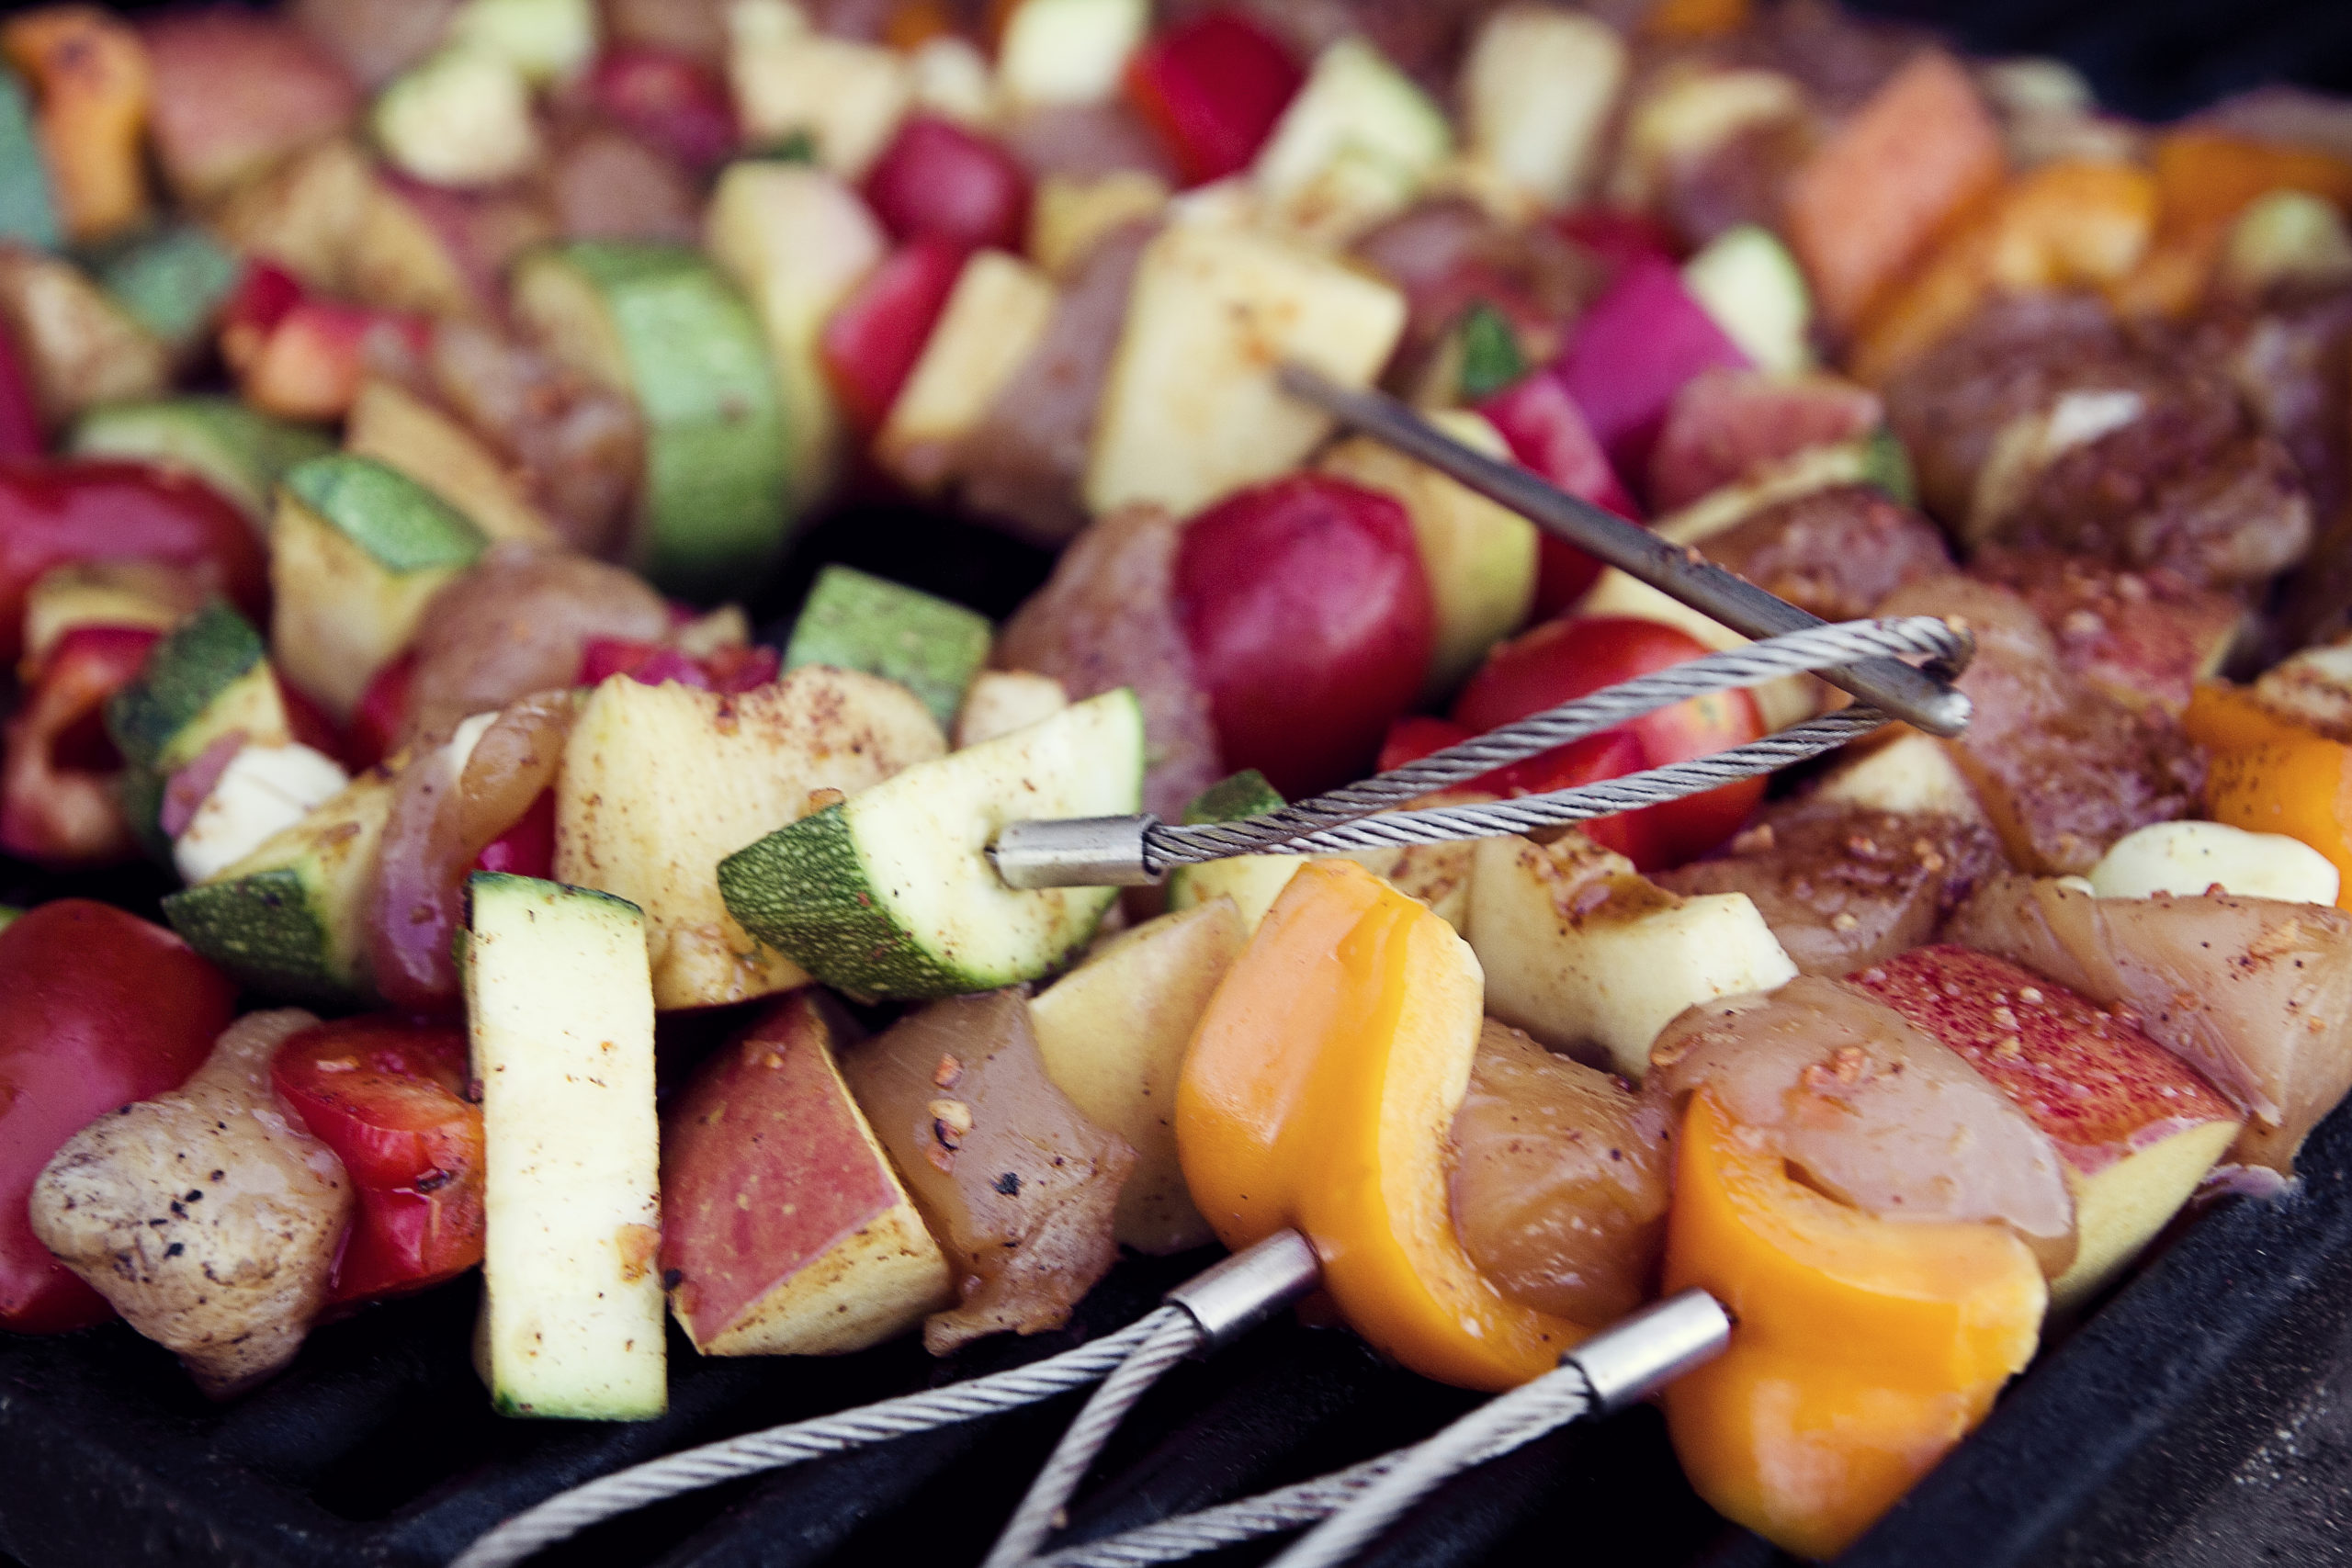 Chicken and Vegetable Skewers For Your First Grill-out of the Season